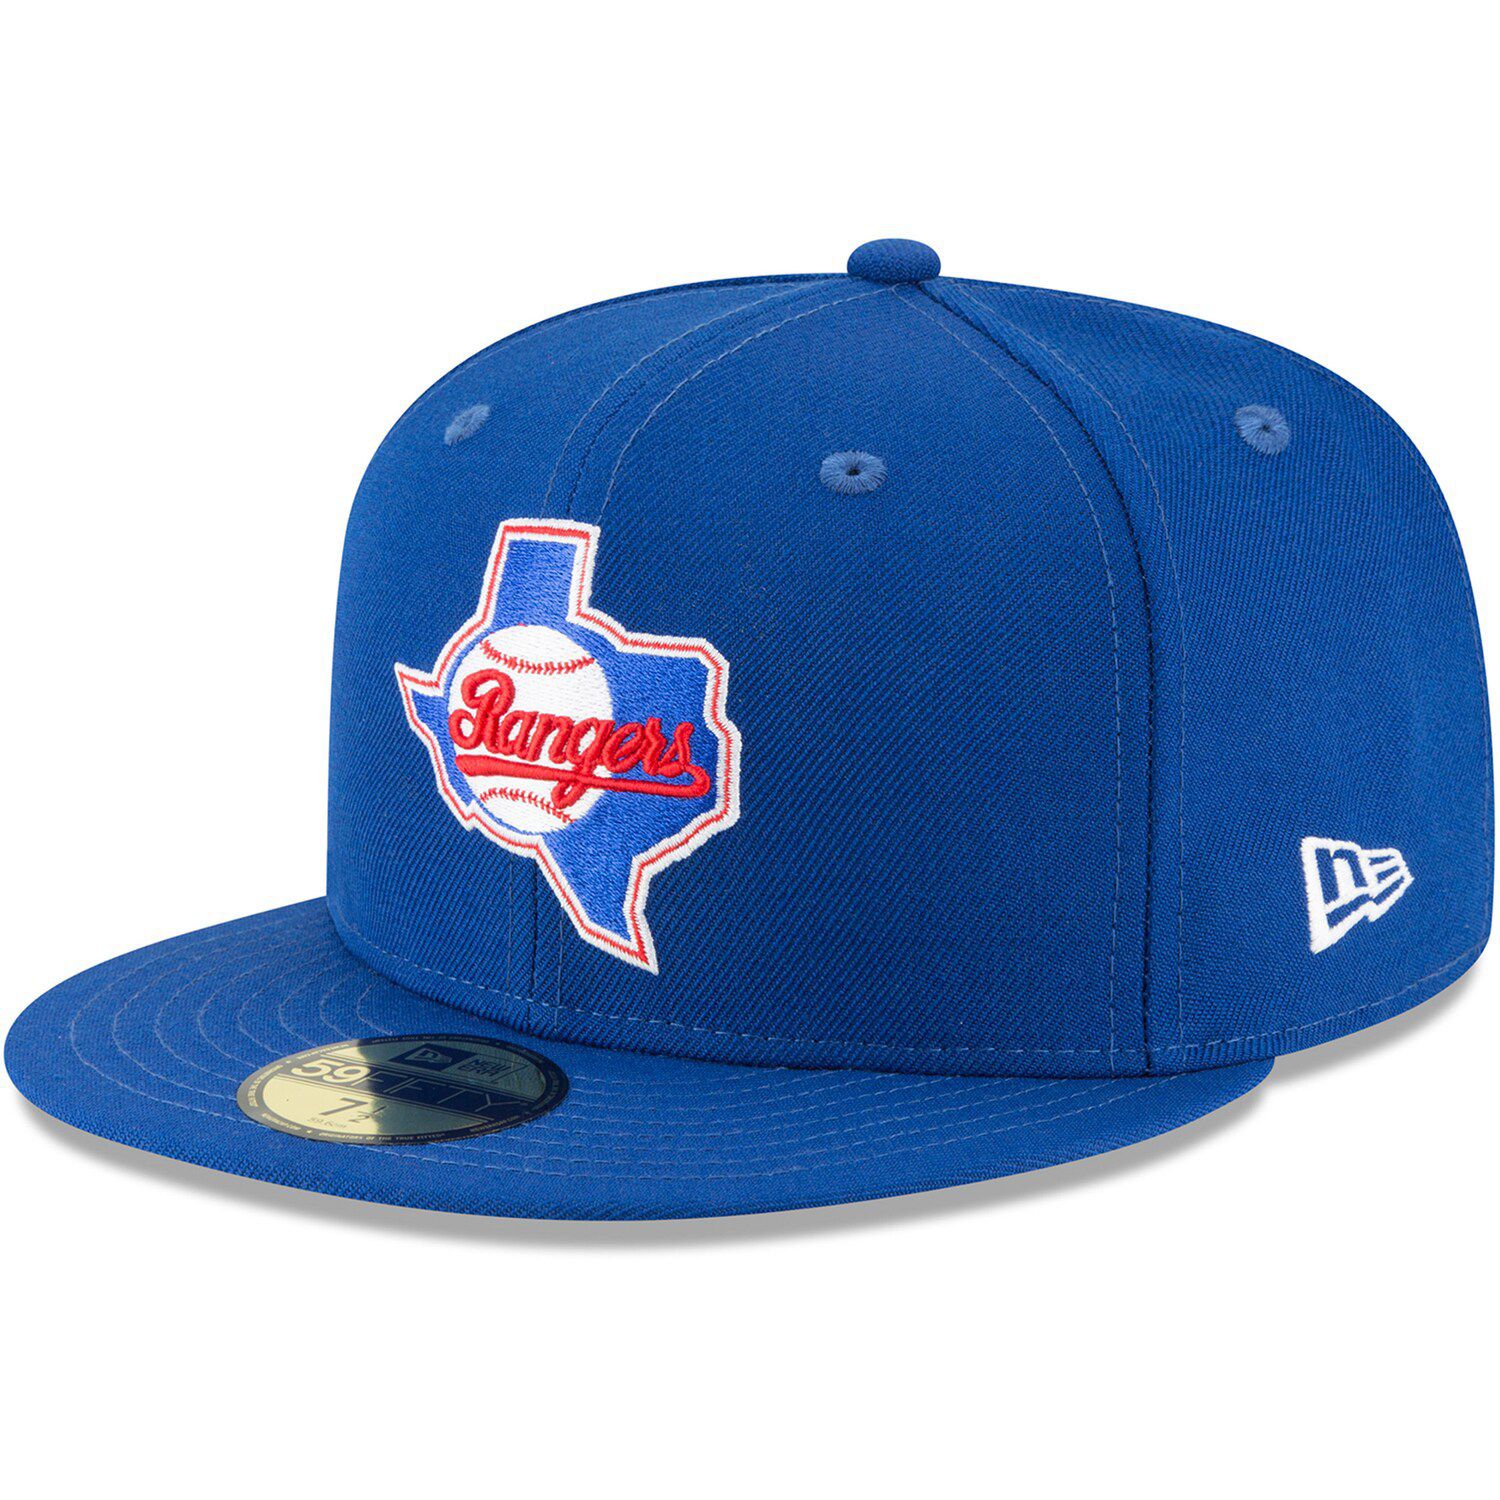 Men’s Texas Rangers Blue City Patch 59FIFTY Fitted Hats